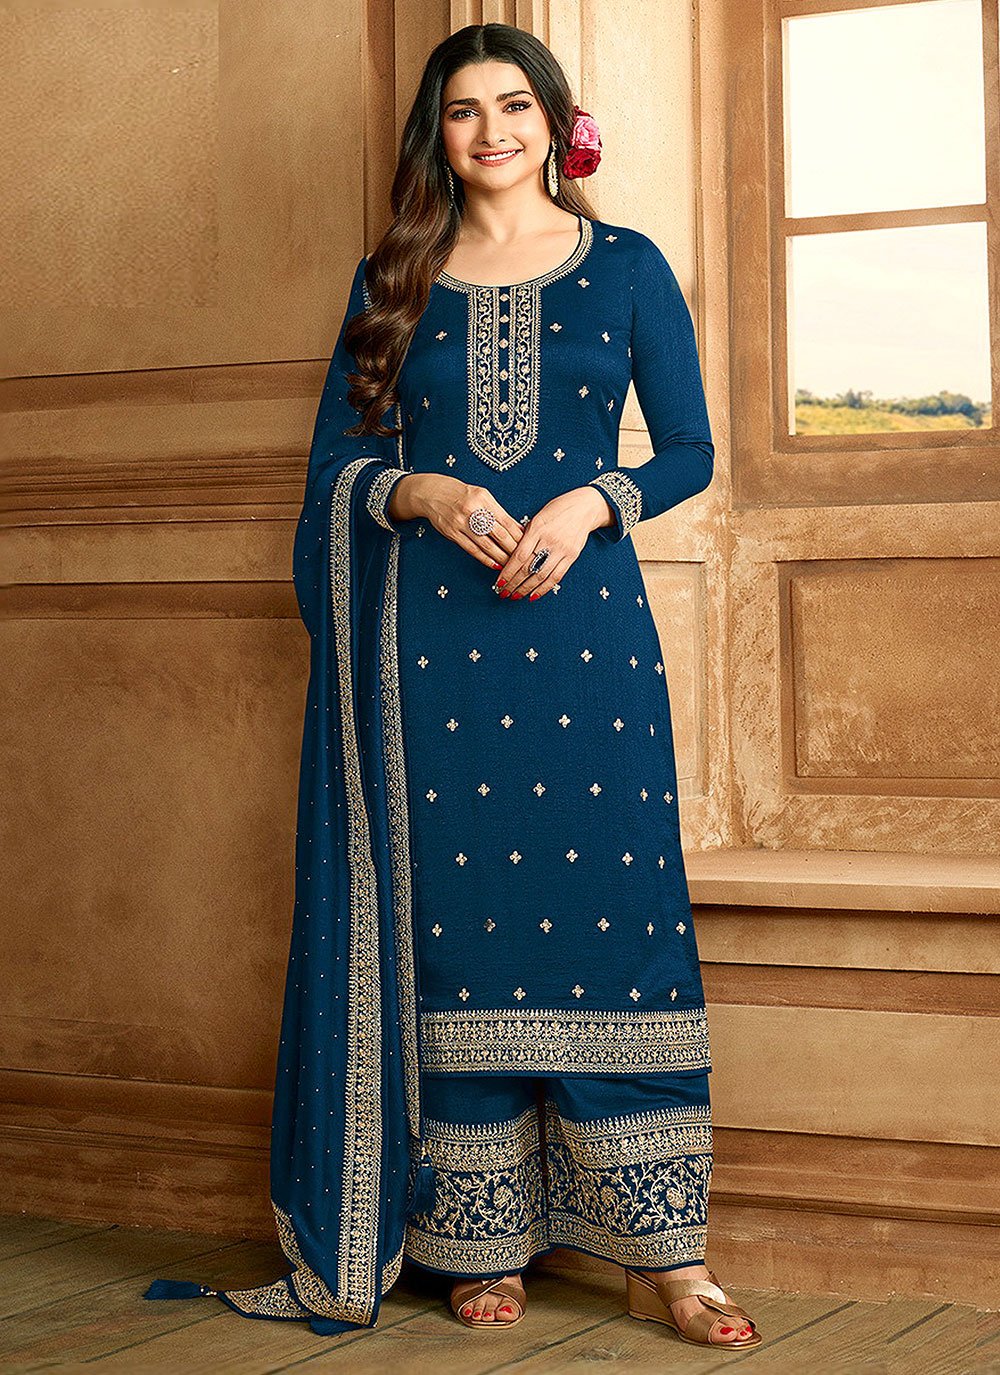 Buy Online Heavy Net With Sequence Embroidery And Stone Work Sky Blue Color  Pakistani Suit From Fashion Bazar At best Price.